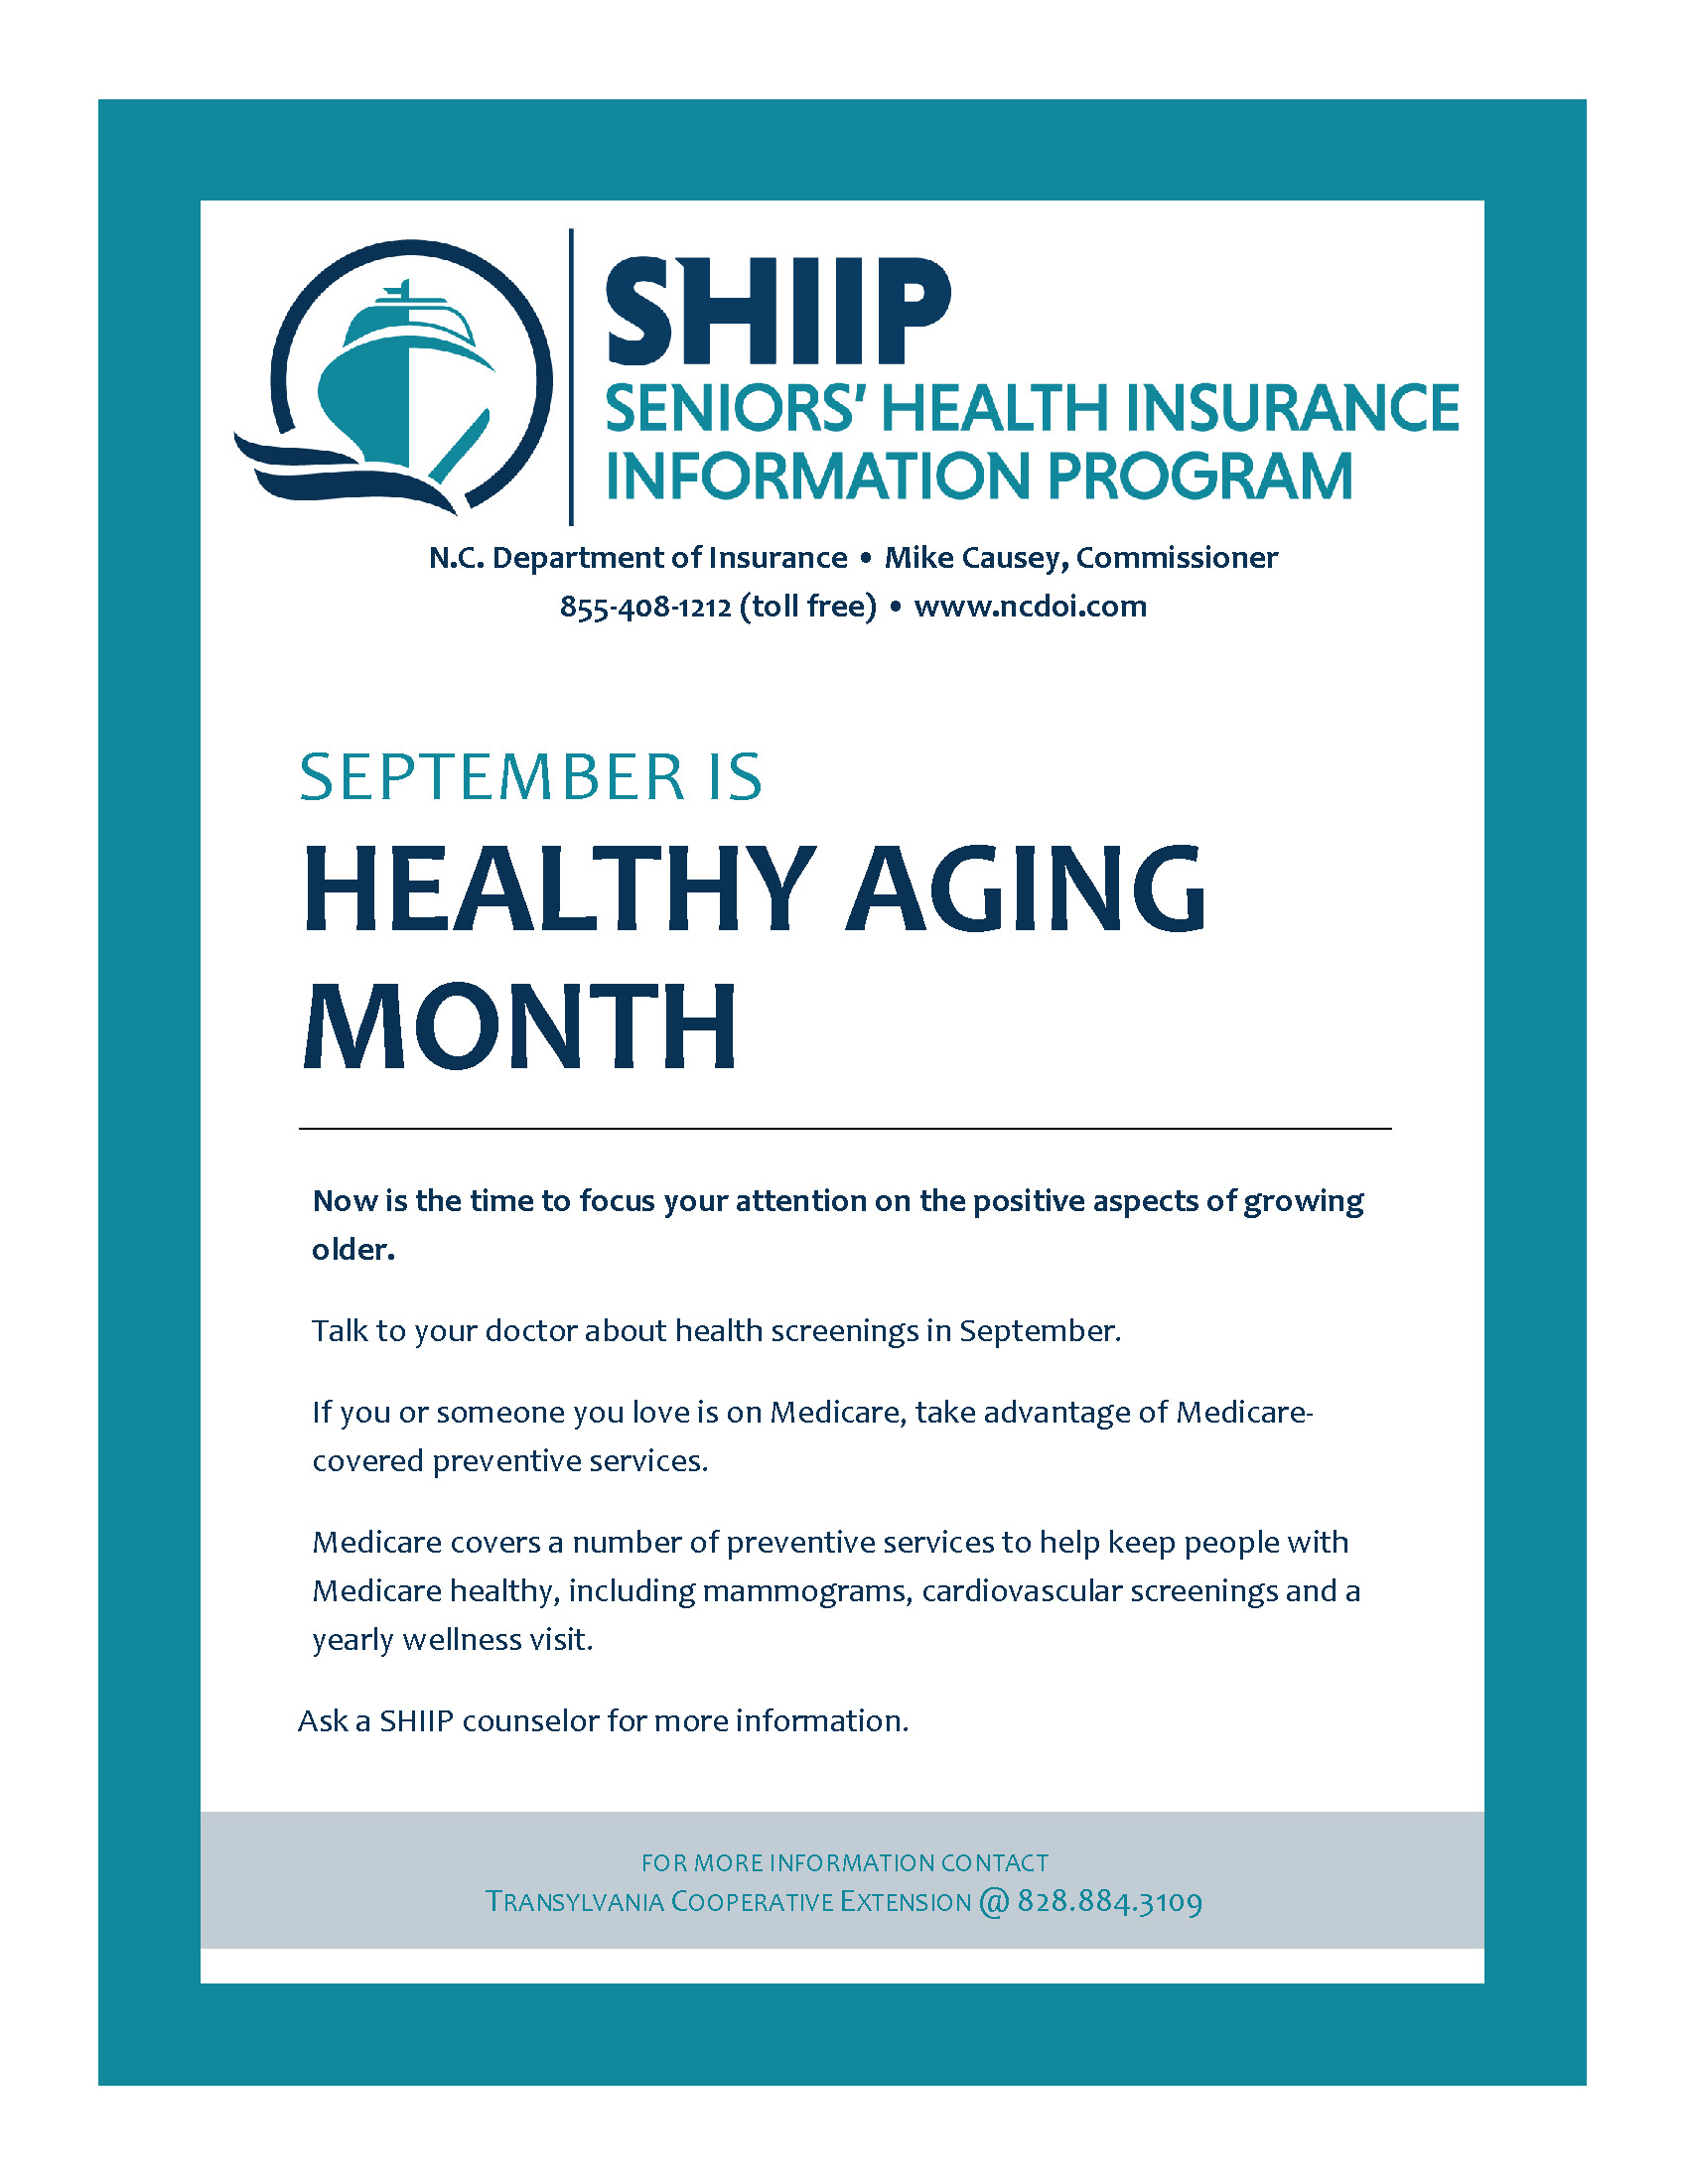 SHIIP Healthy Aging Month Poster